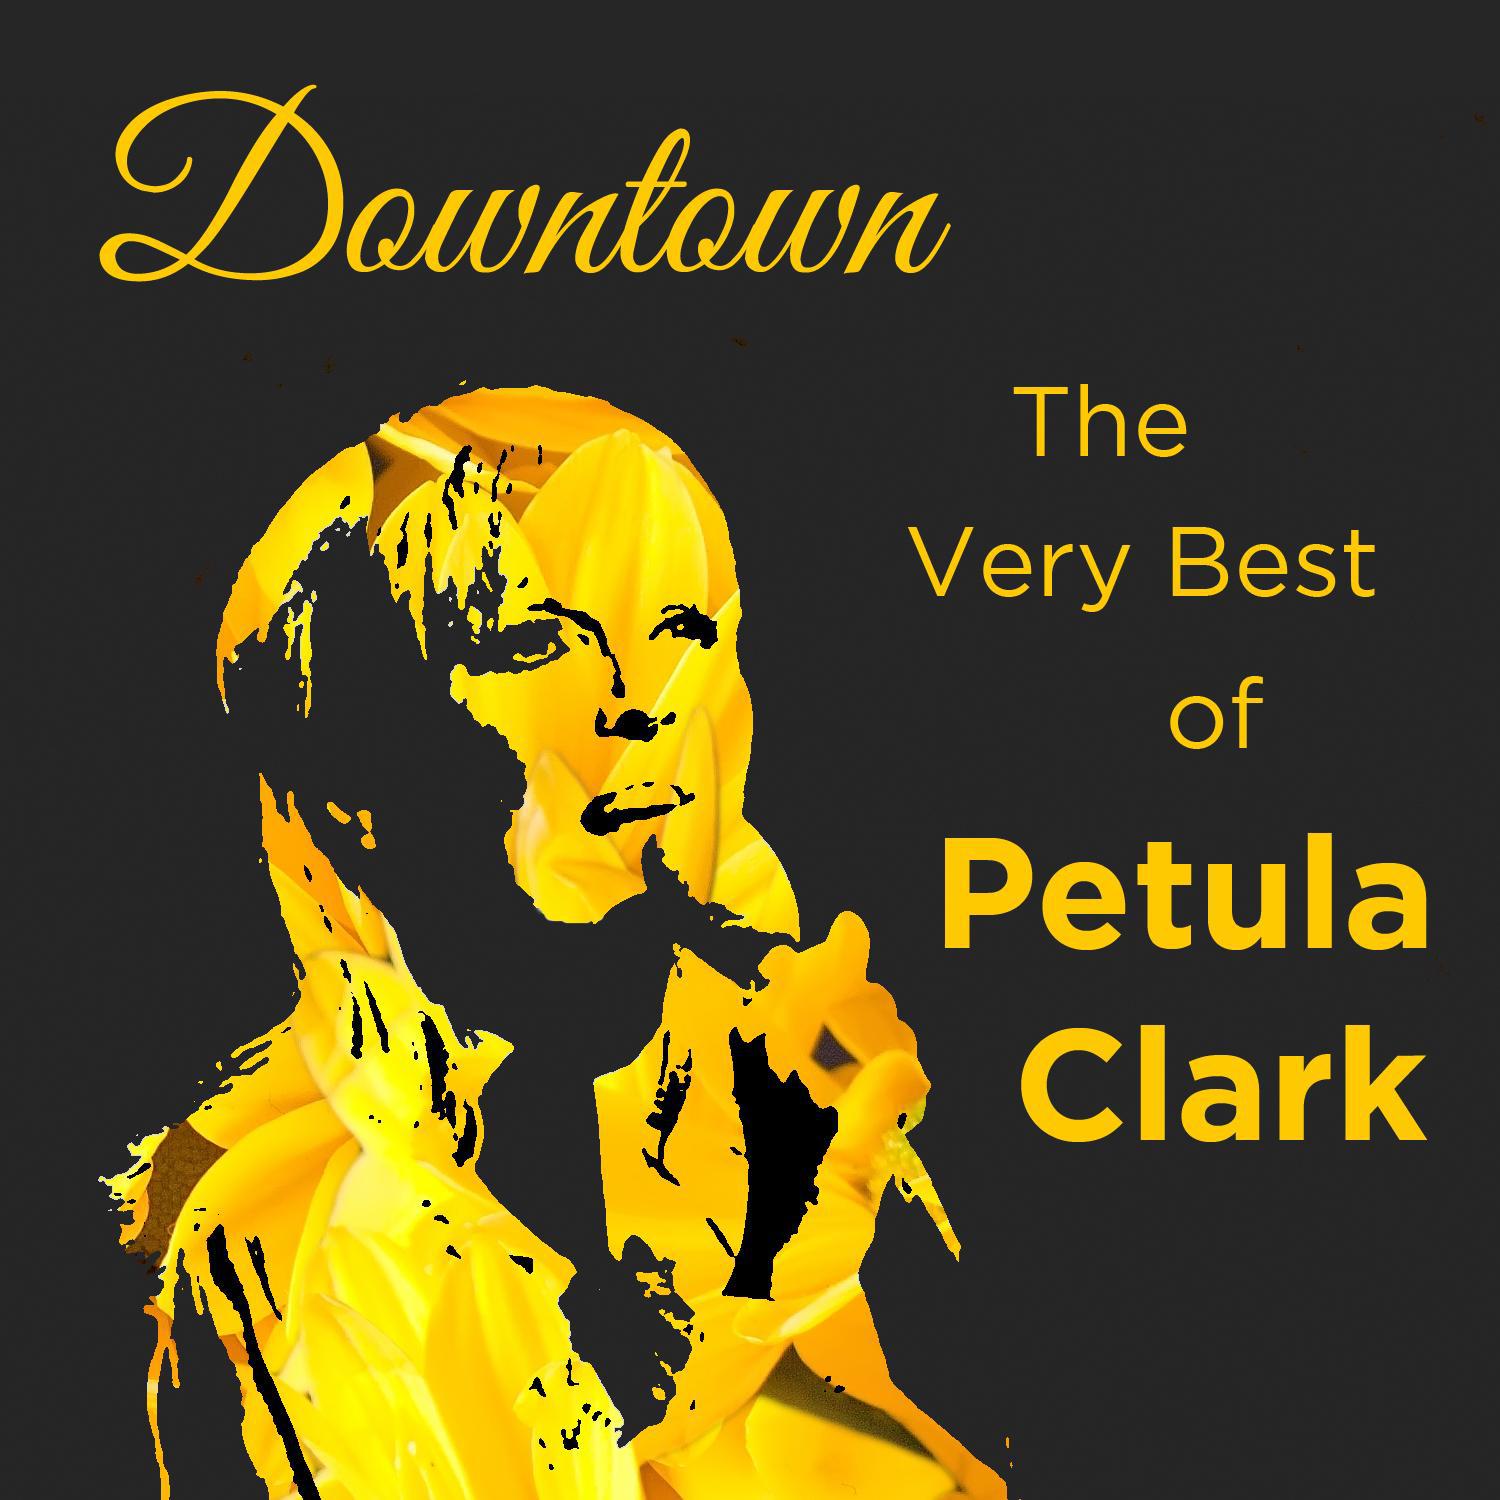 Downtown: The Very Best of Petula Clark